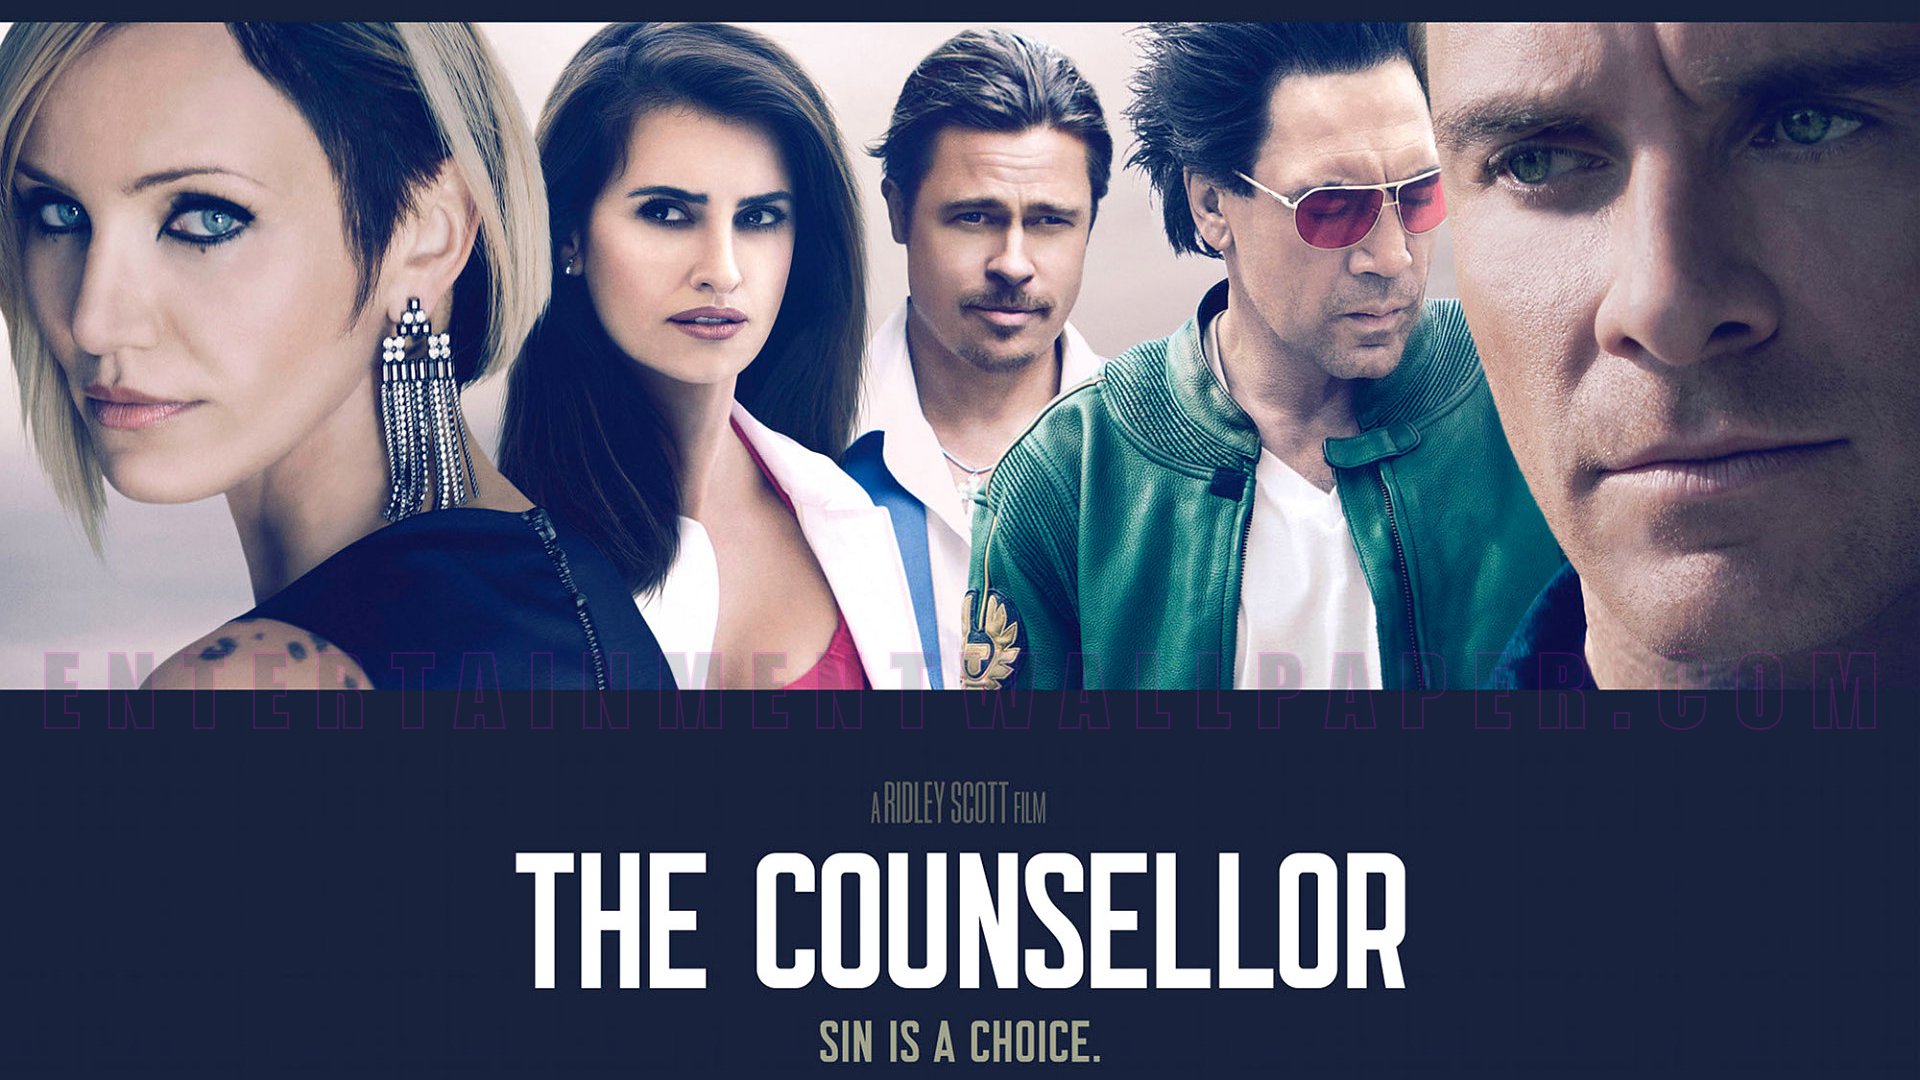 High Resolution Wallpaper | The Counselor 1920x1080 px